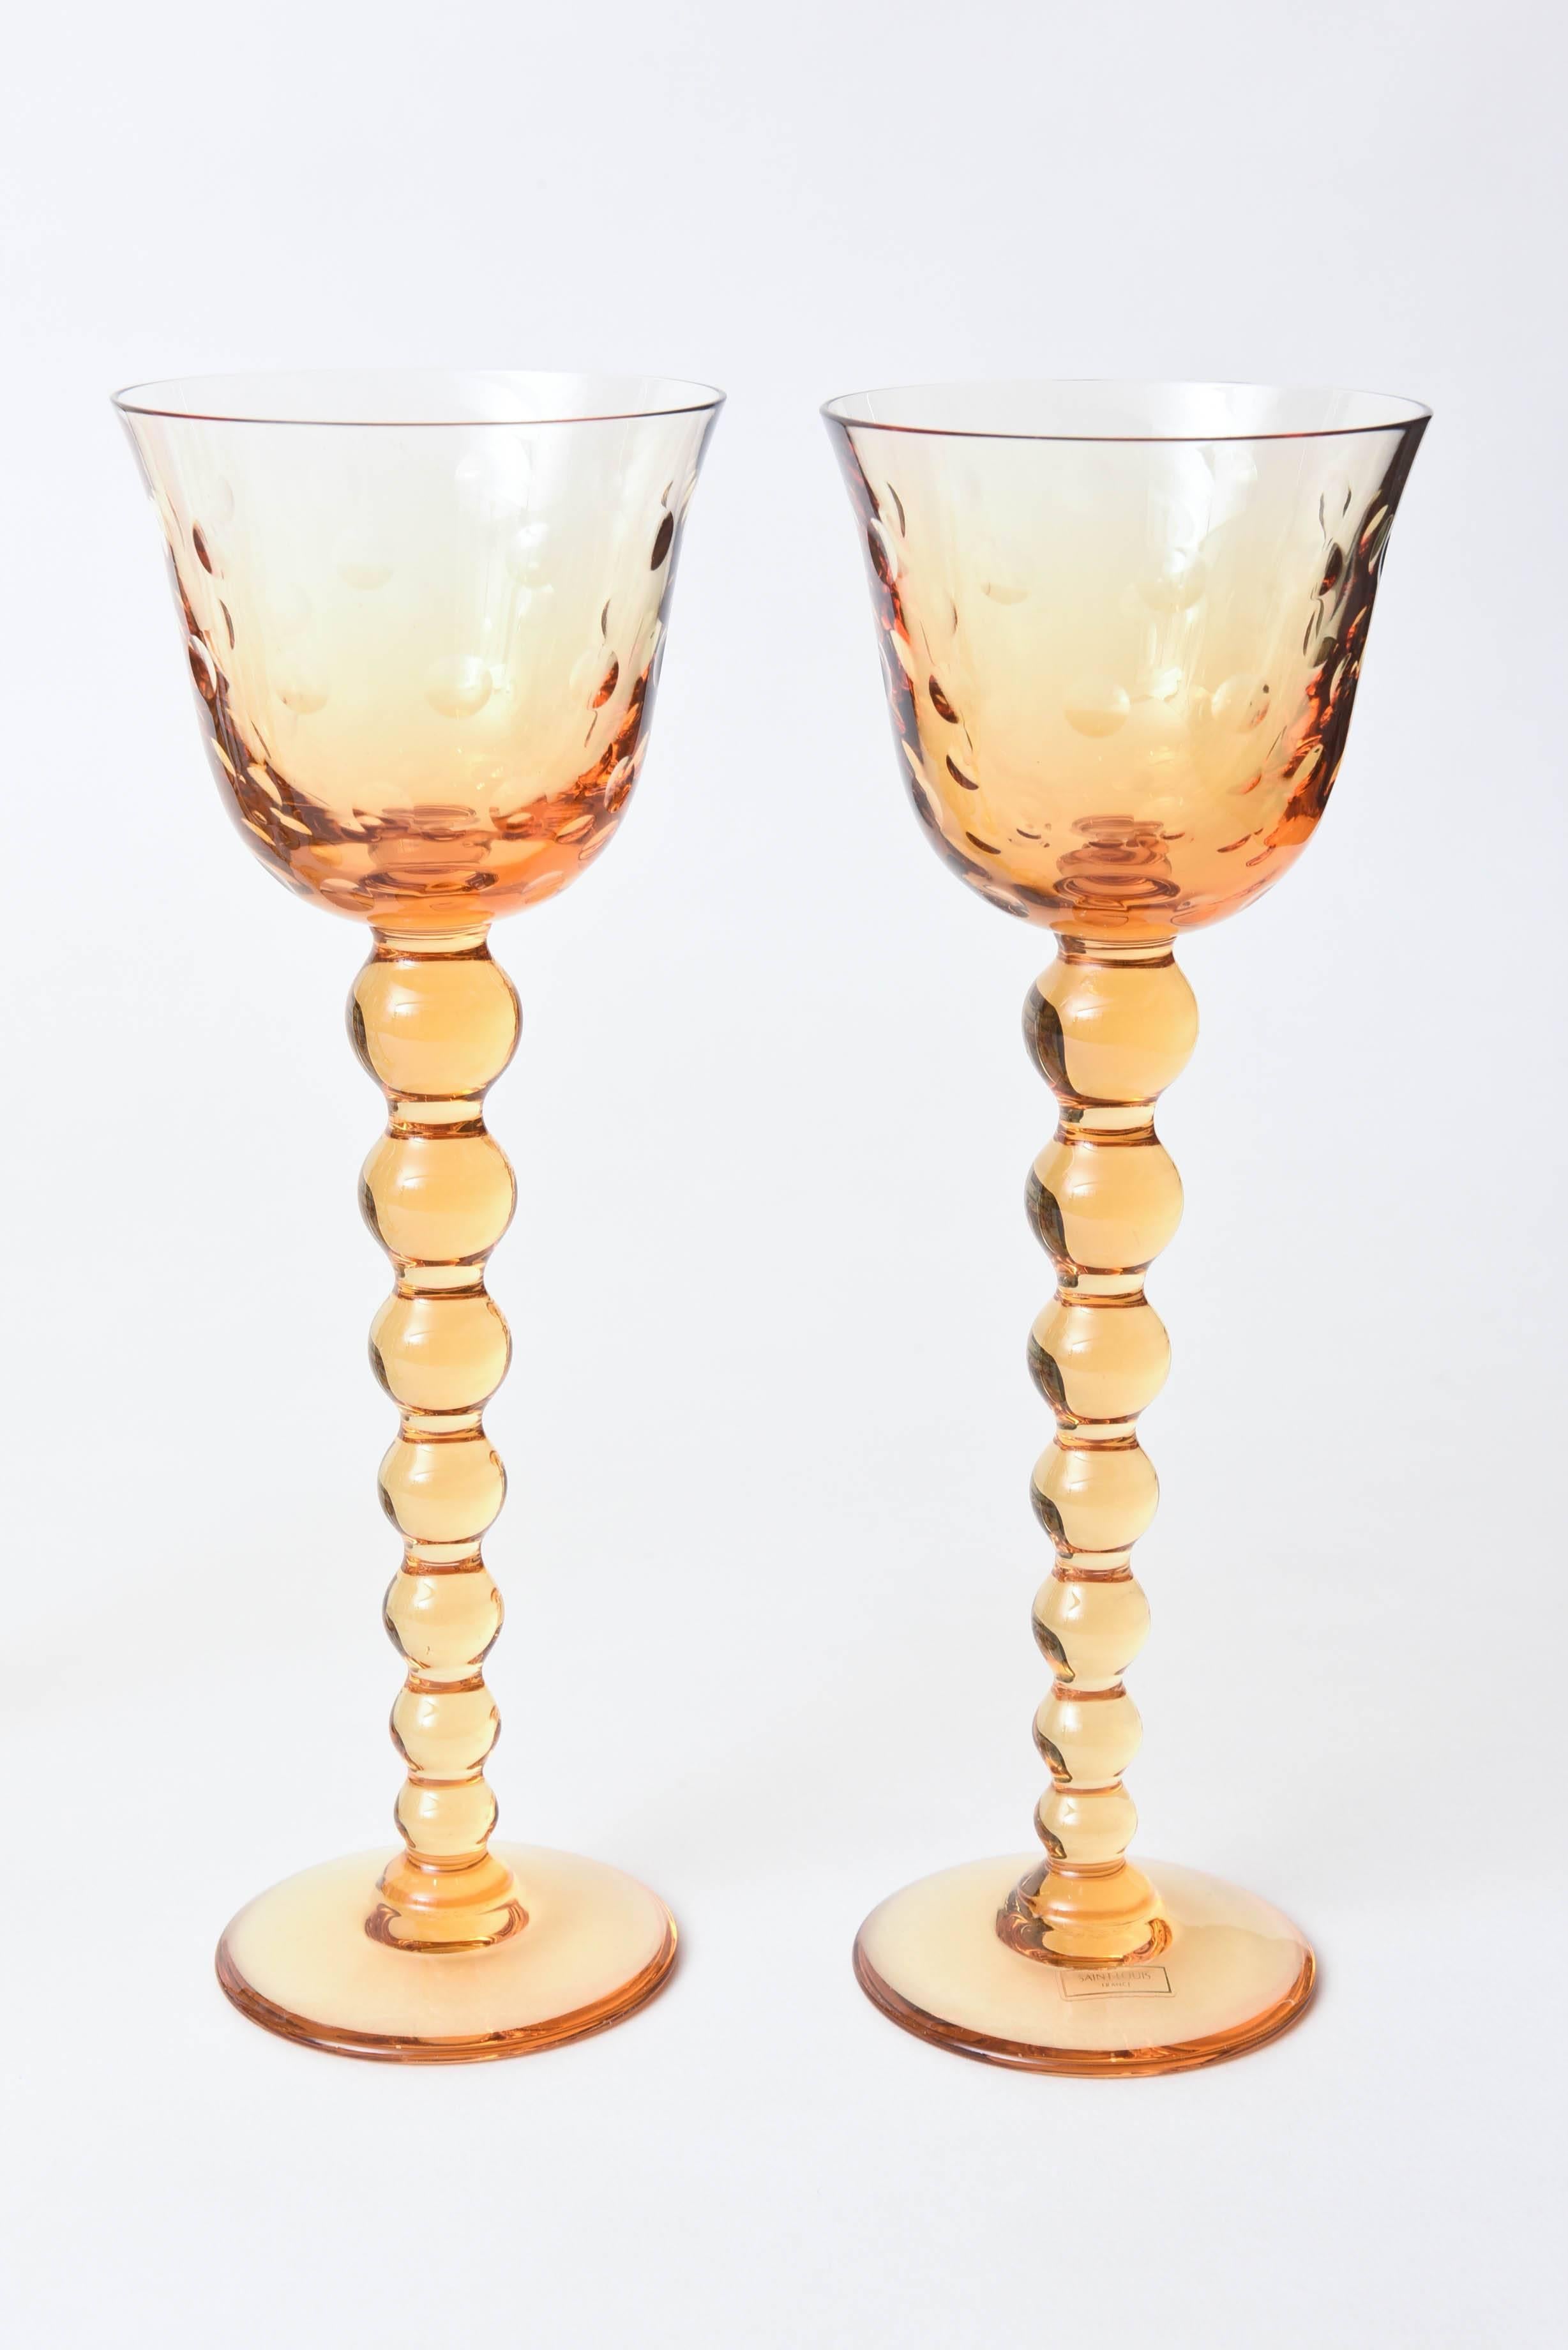 A wonderful set of fine crystal goblets from the storied crystal firm of Saint Louis, France. This is their signature 